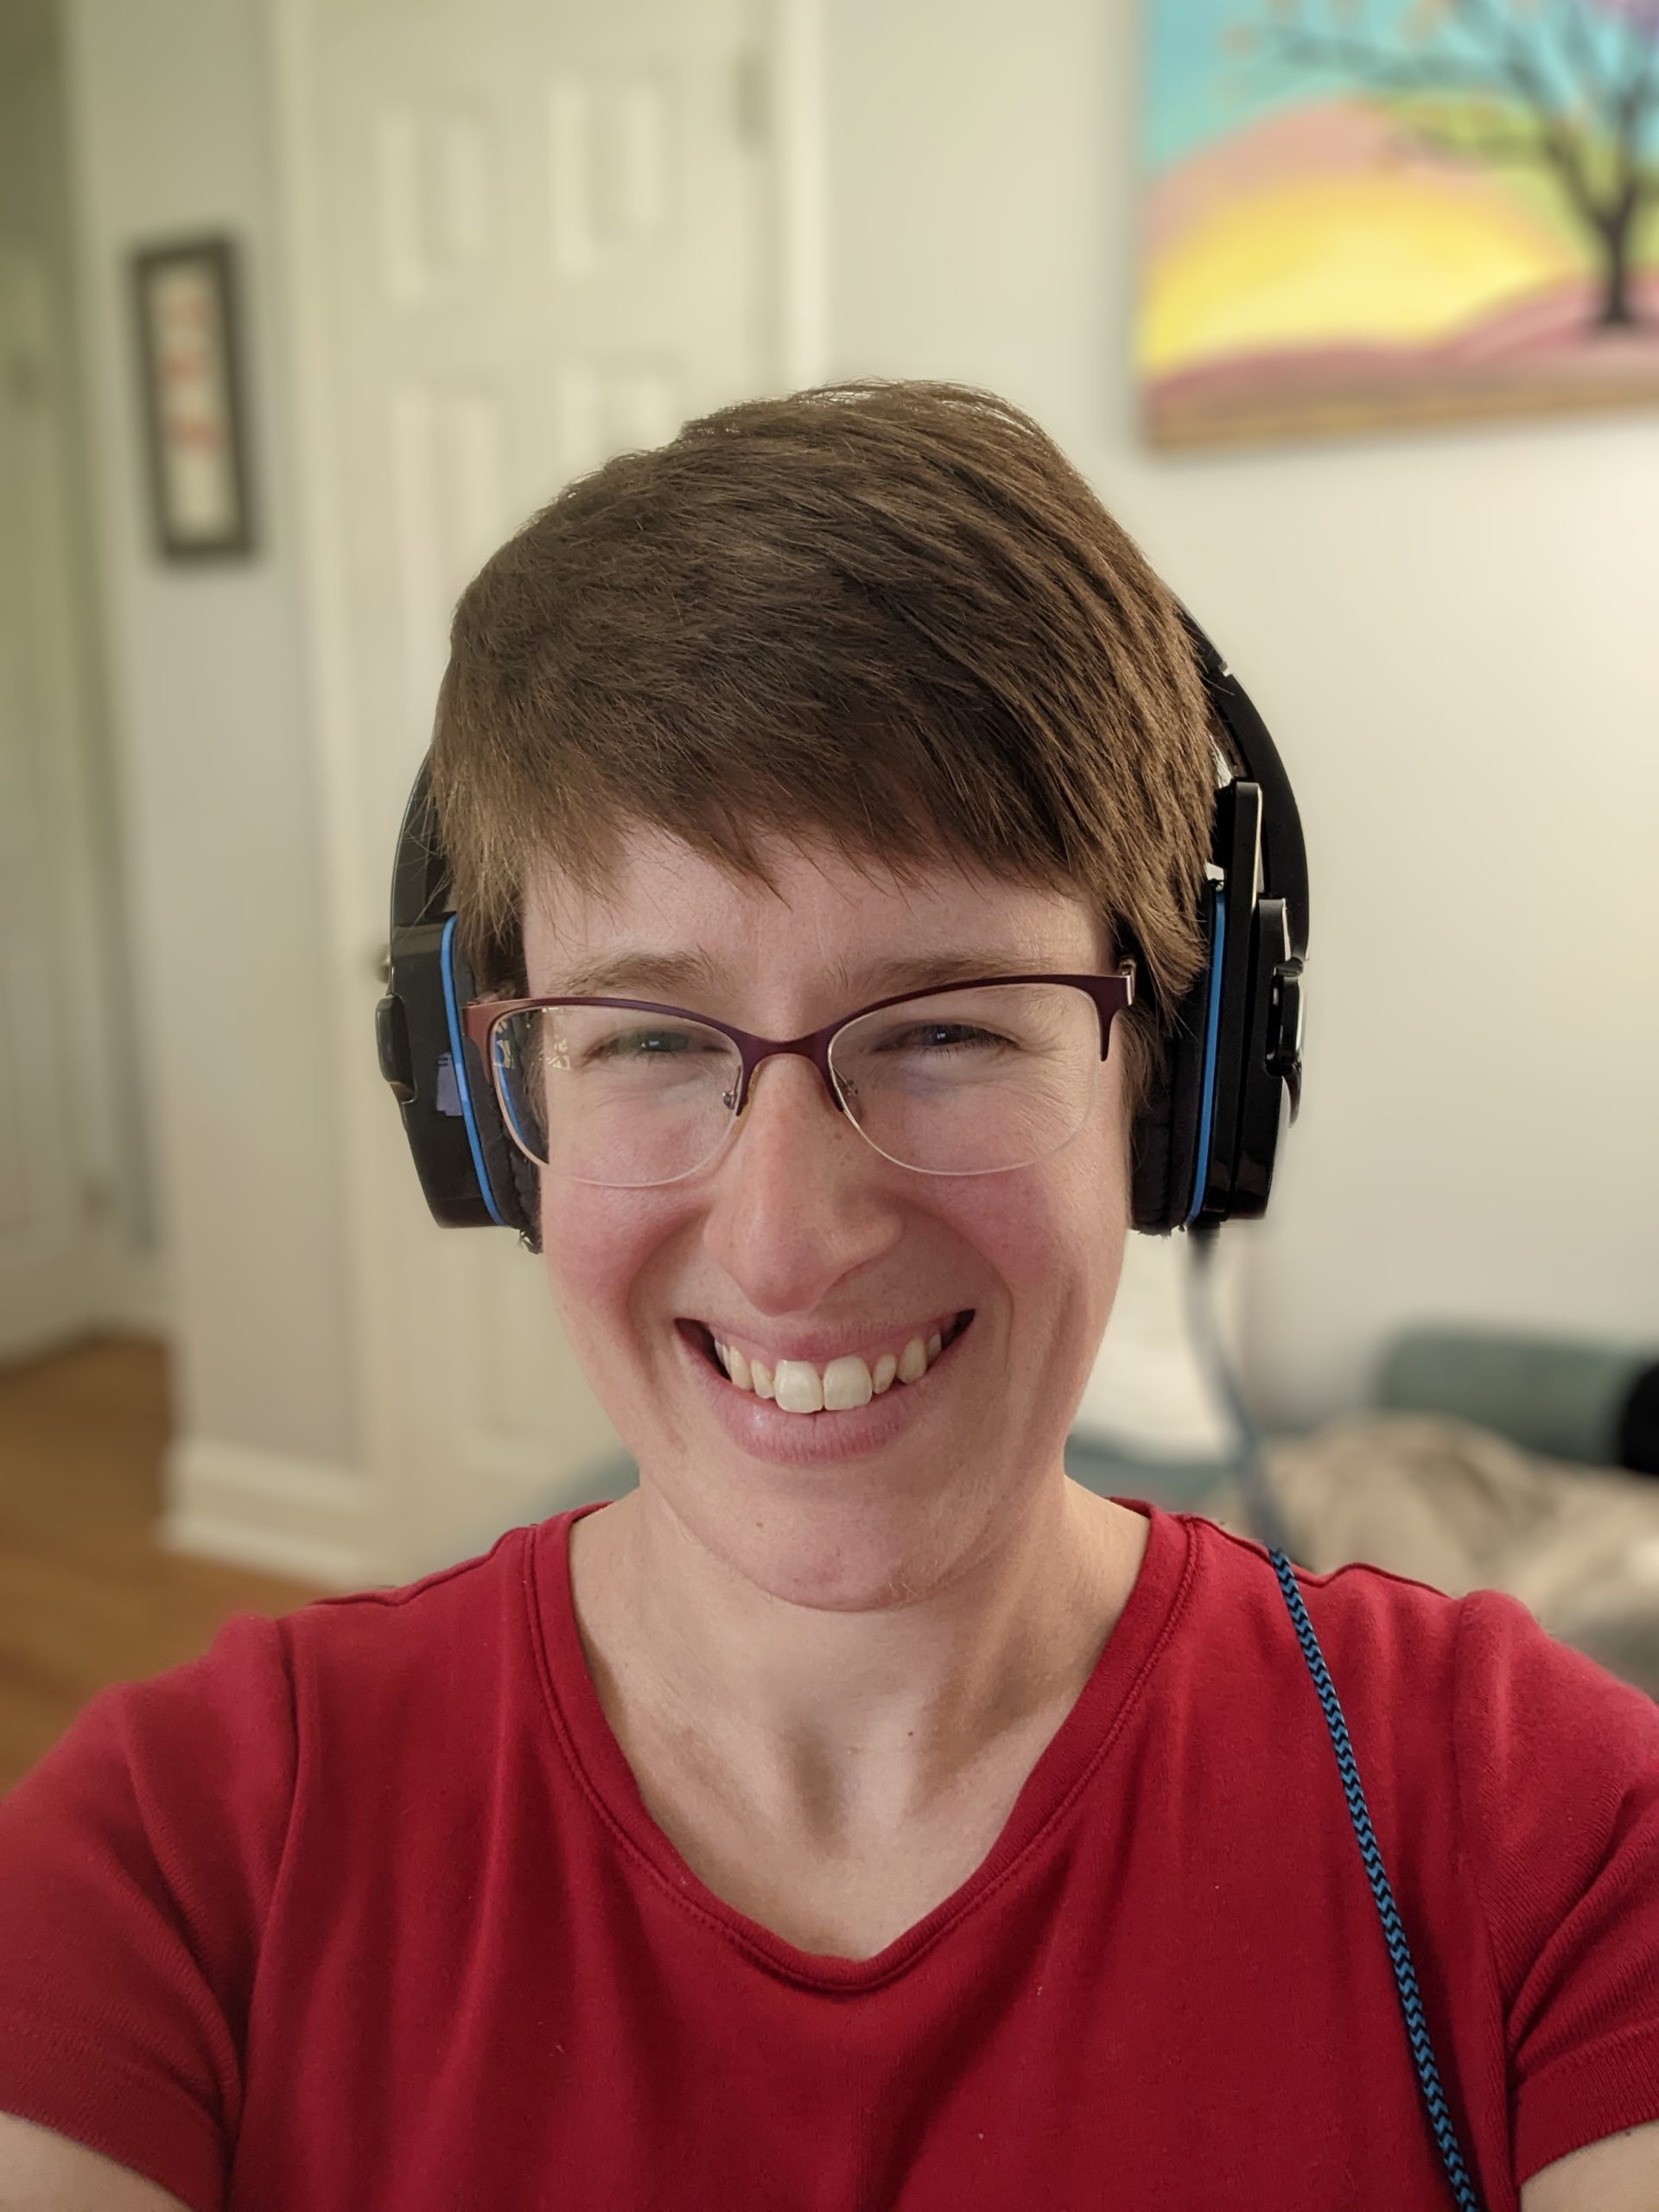 White person with short, brown hair wearing a red shirt and headphones